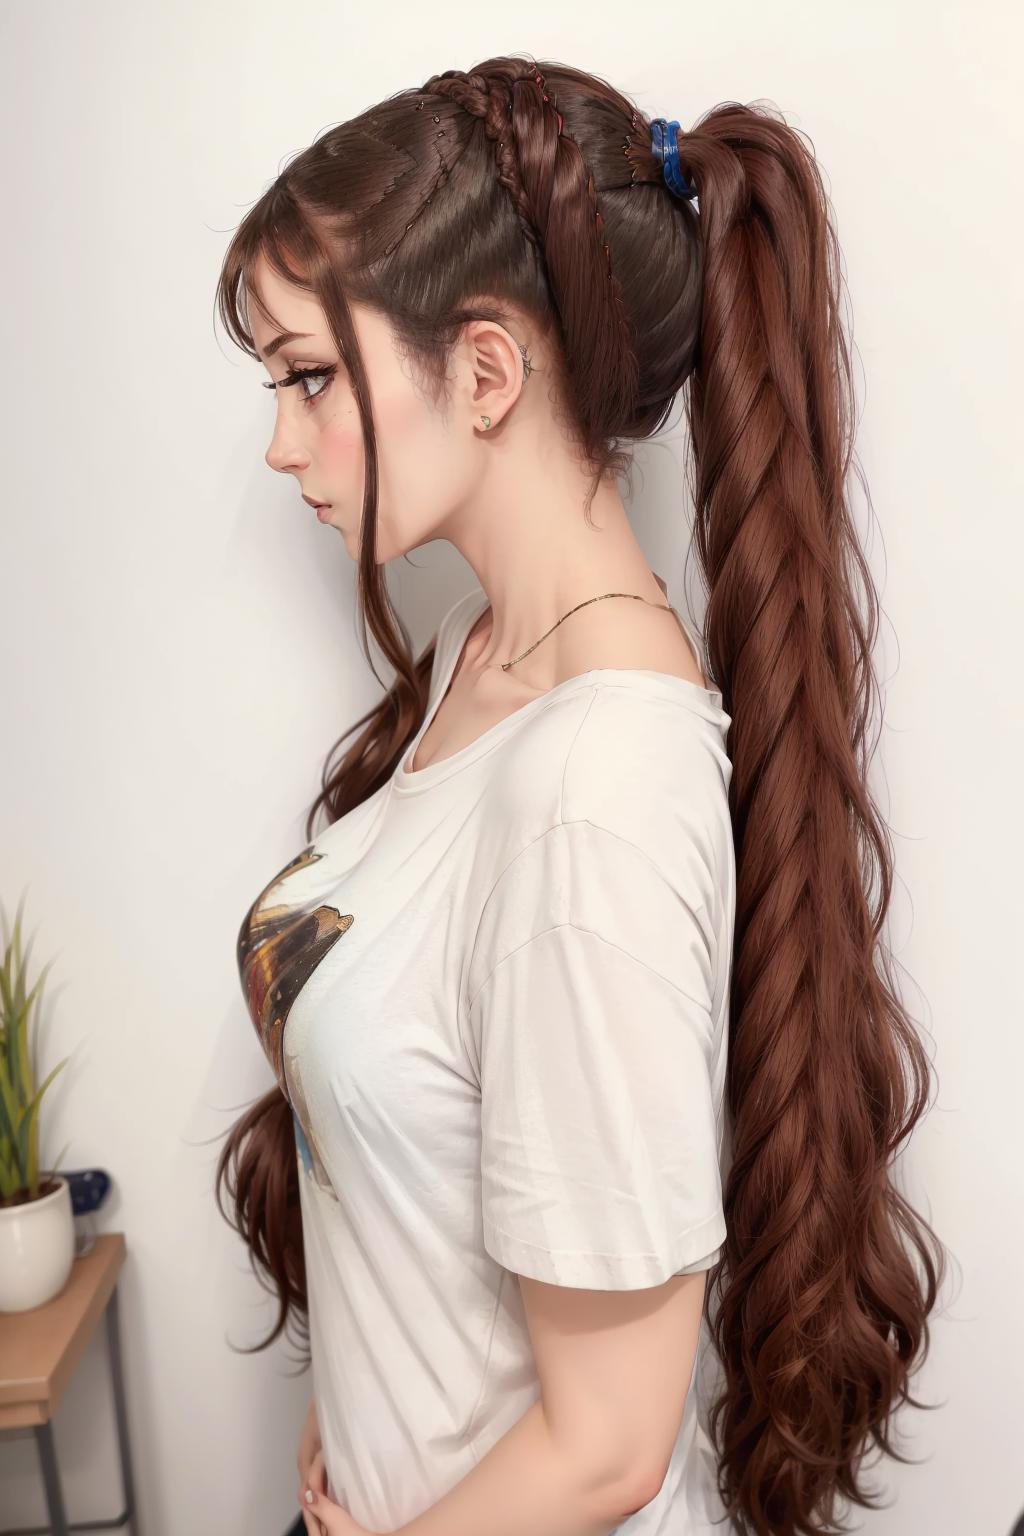 Long Ponytail Hairstyle image by DealWithIt